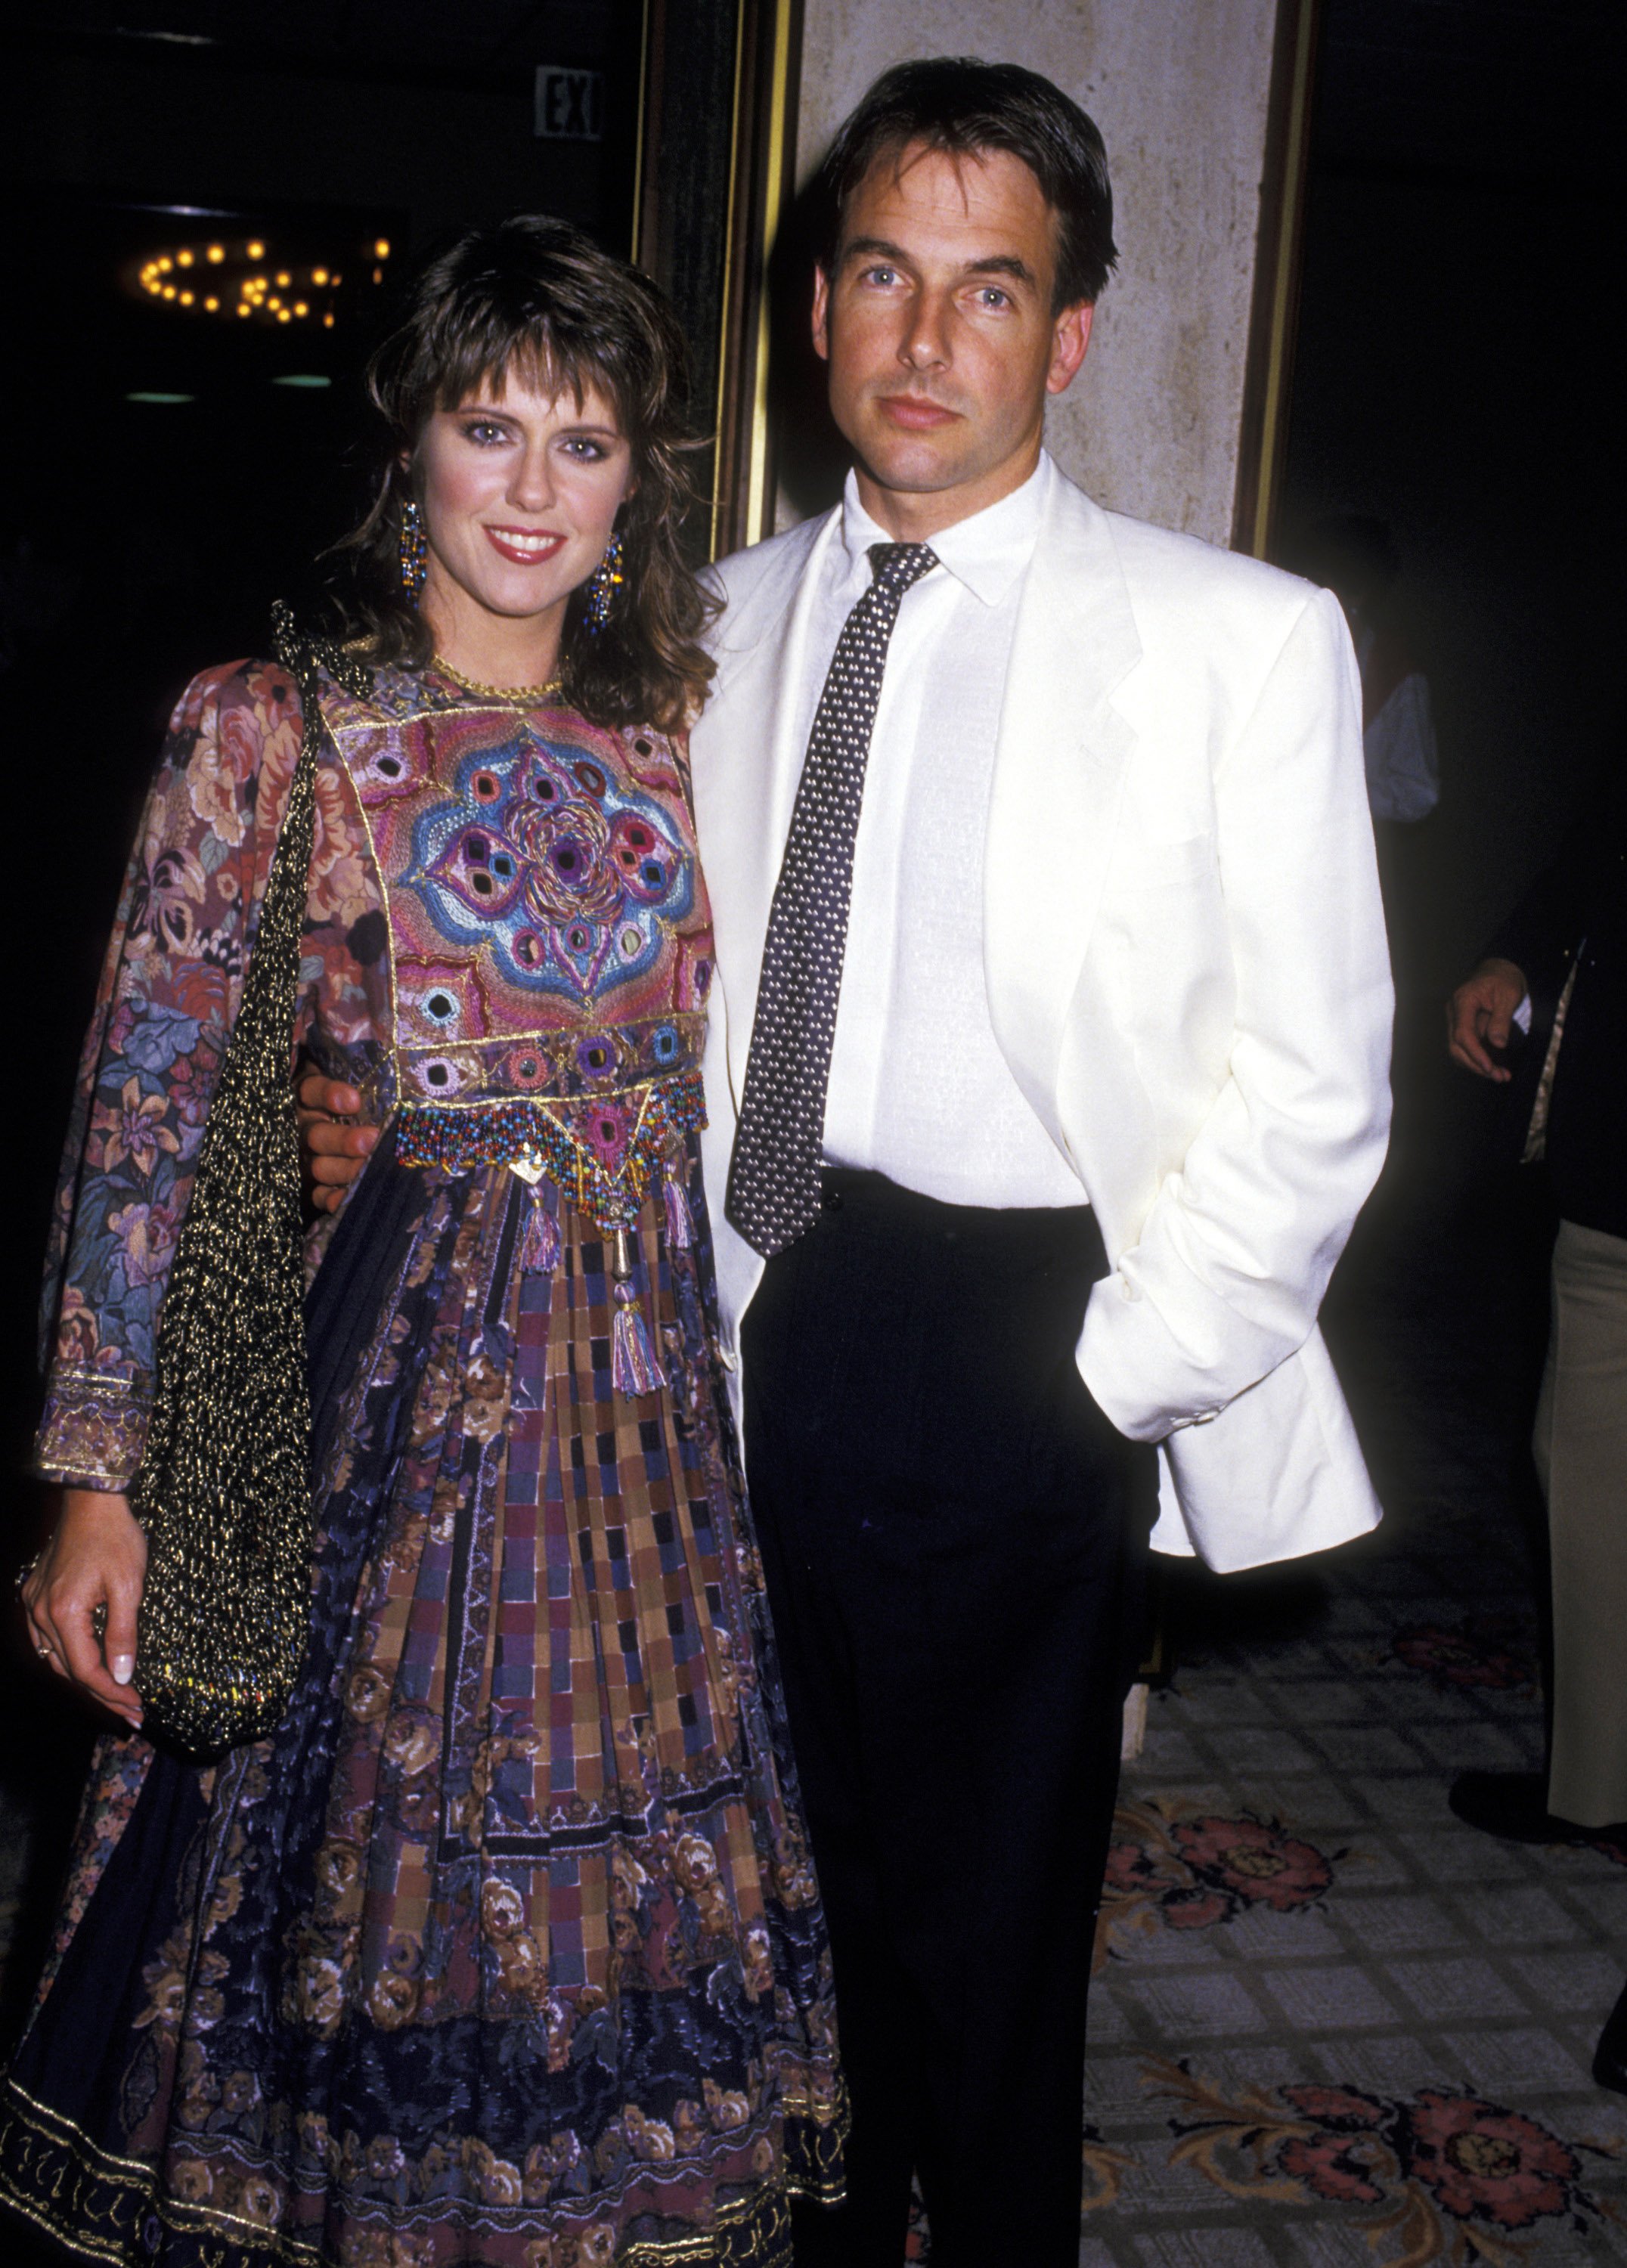 Pam Dawber and Mark Harmon at the Premiere of "Dr. Dolittle" in New York City, New York, United States. | Source: Getty Images